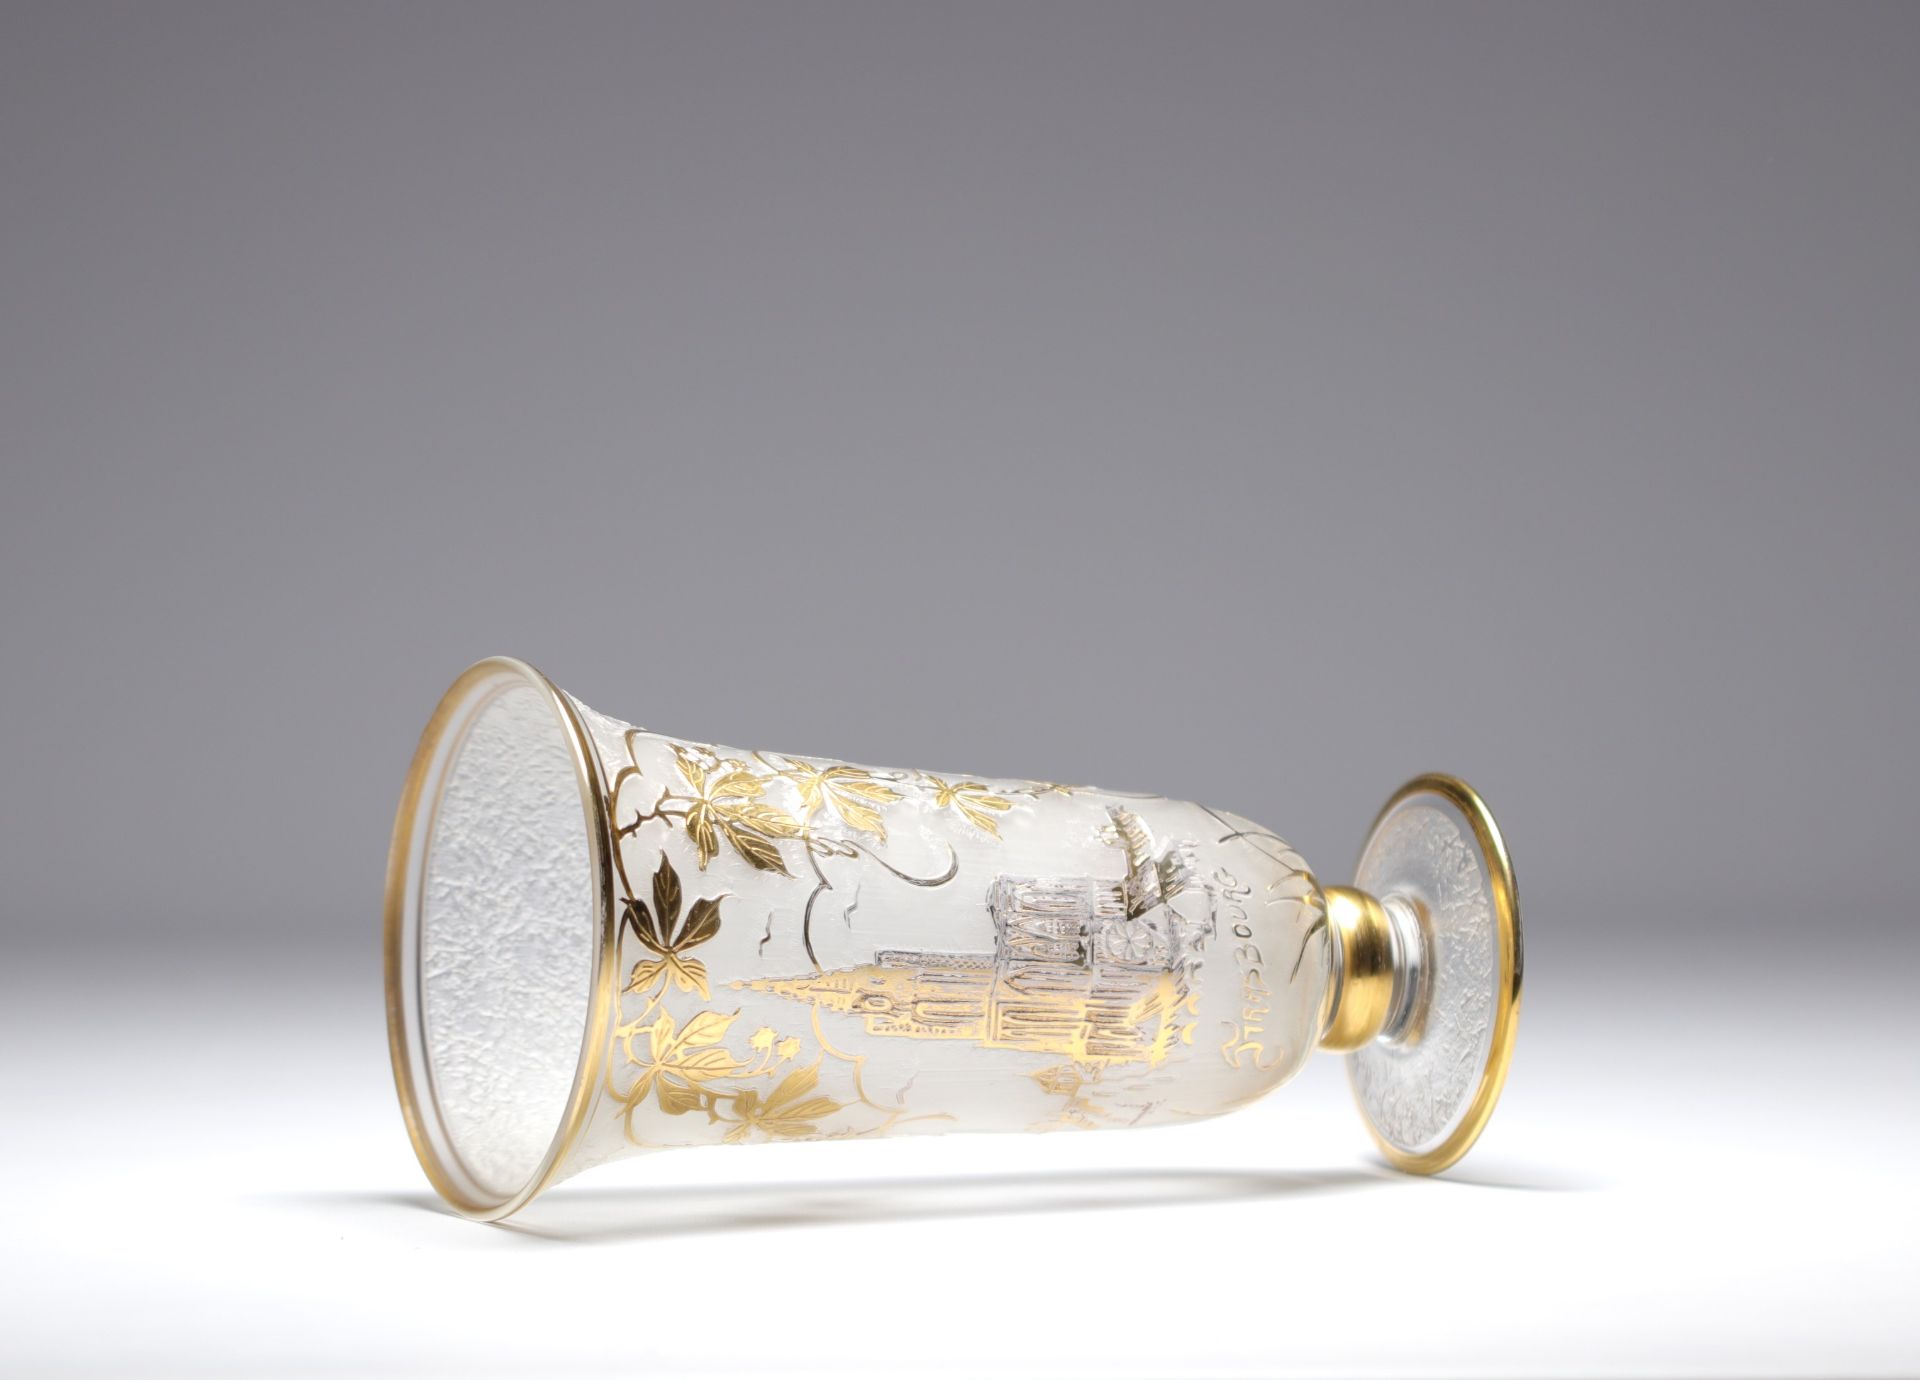 Adat - Art Deco vase in frosted acid-etched glass with gold highlights depicting Strasbourg Cathedra - Bild 3 aus 3